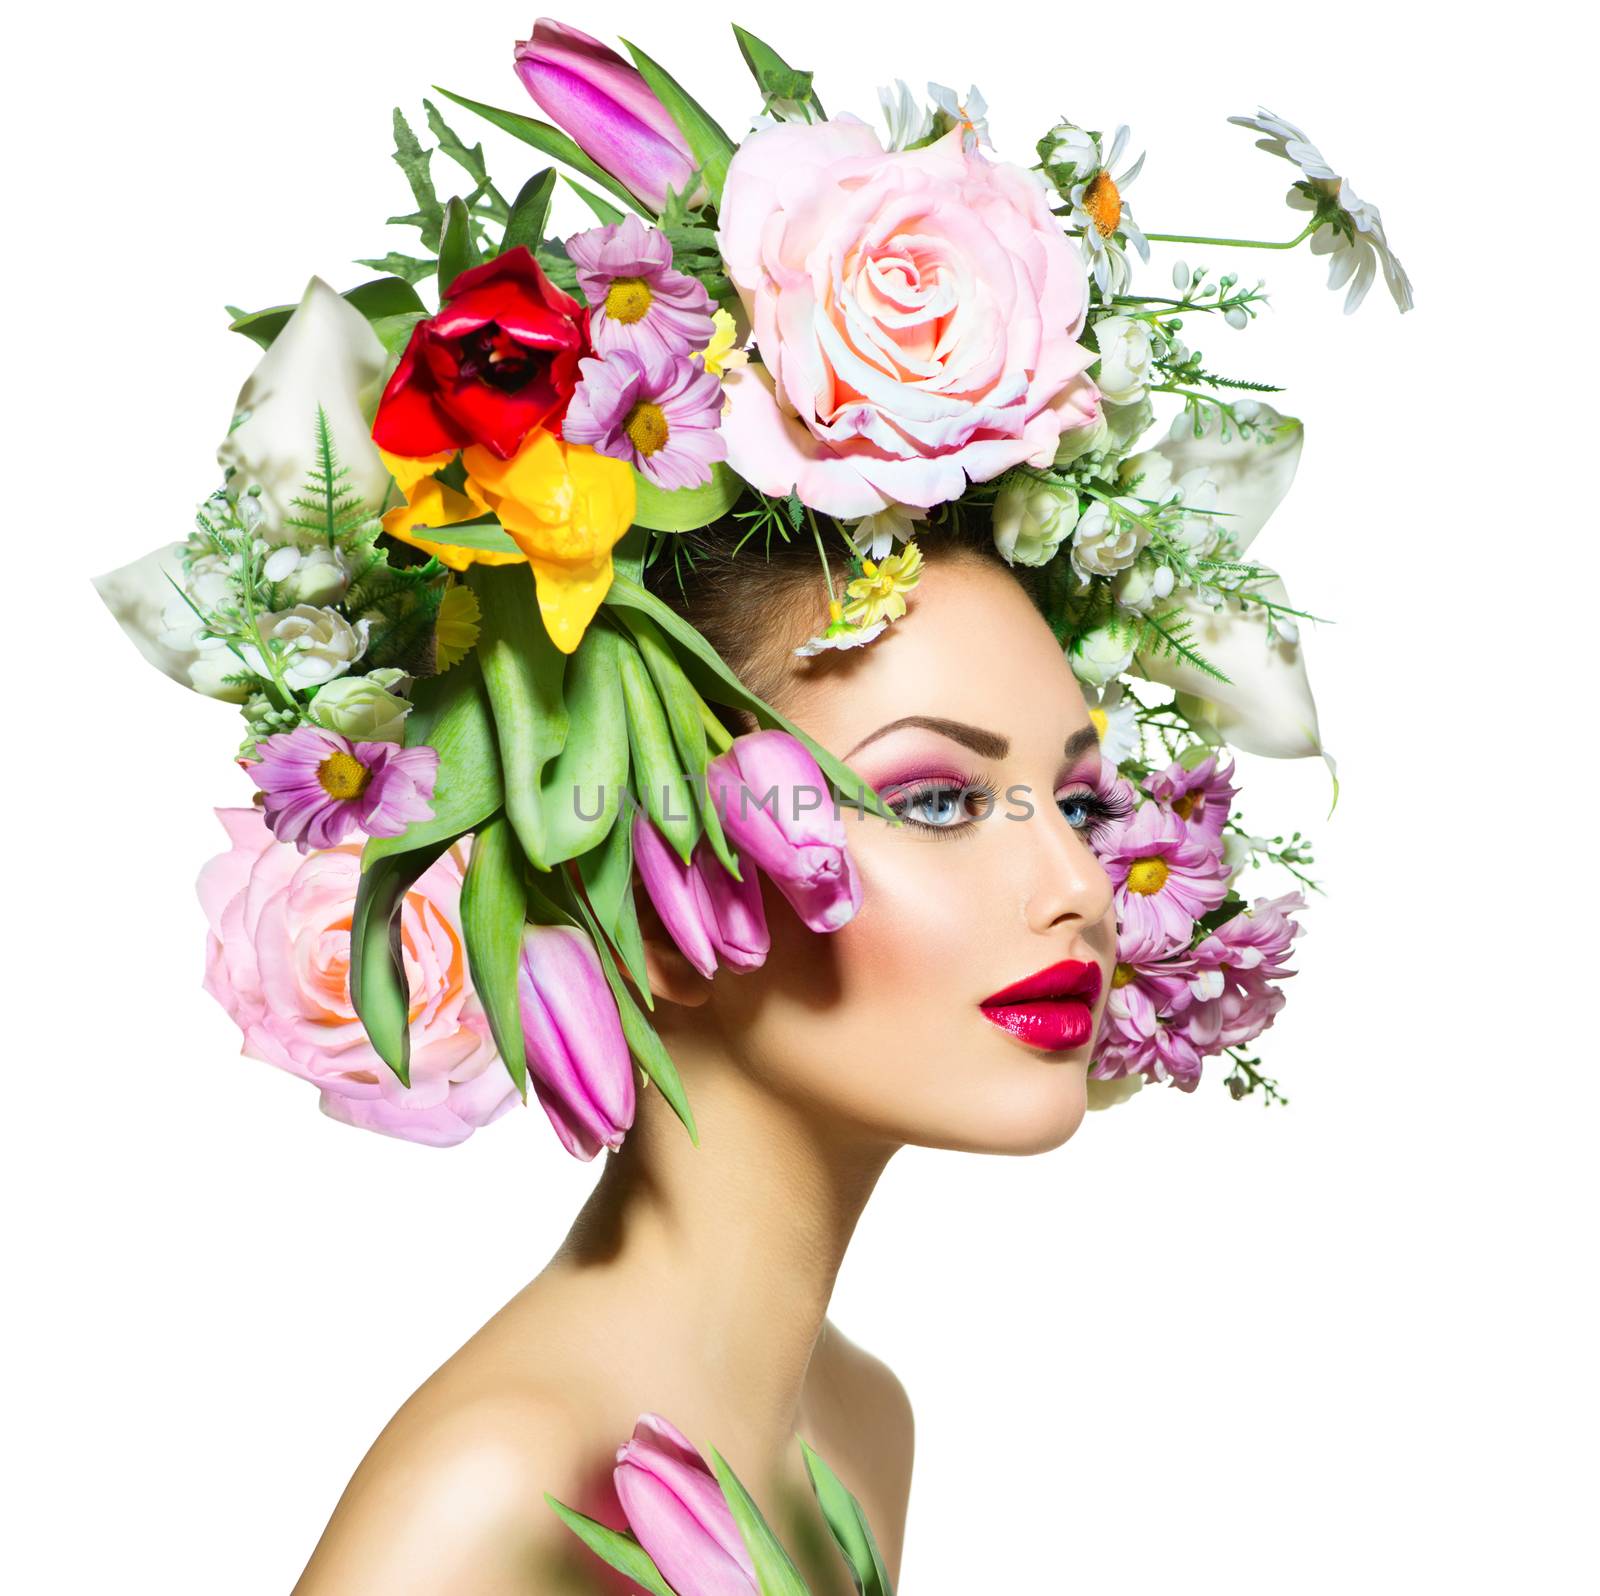 Beauty Spring Girl with Flowers Hair Style by SubbotinaA